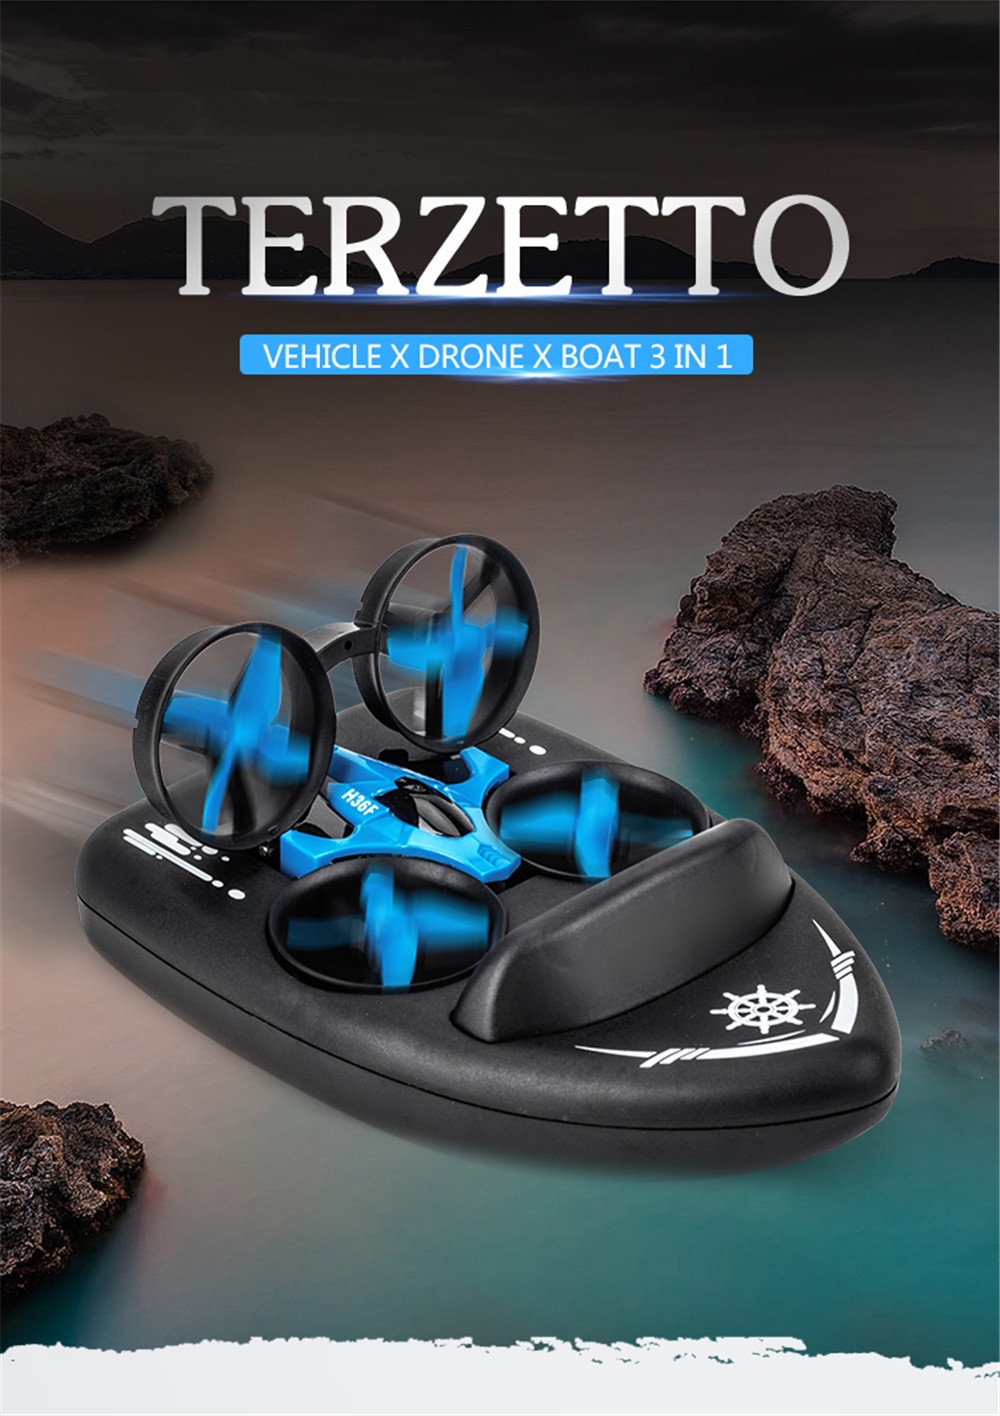 JJRC H36F Terzetto 1/20 2.4G 3 In 1 RC Vehicle Flying Drone Land Driving Boat RTR Model 